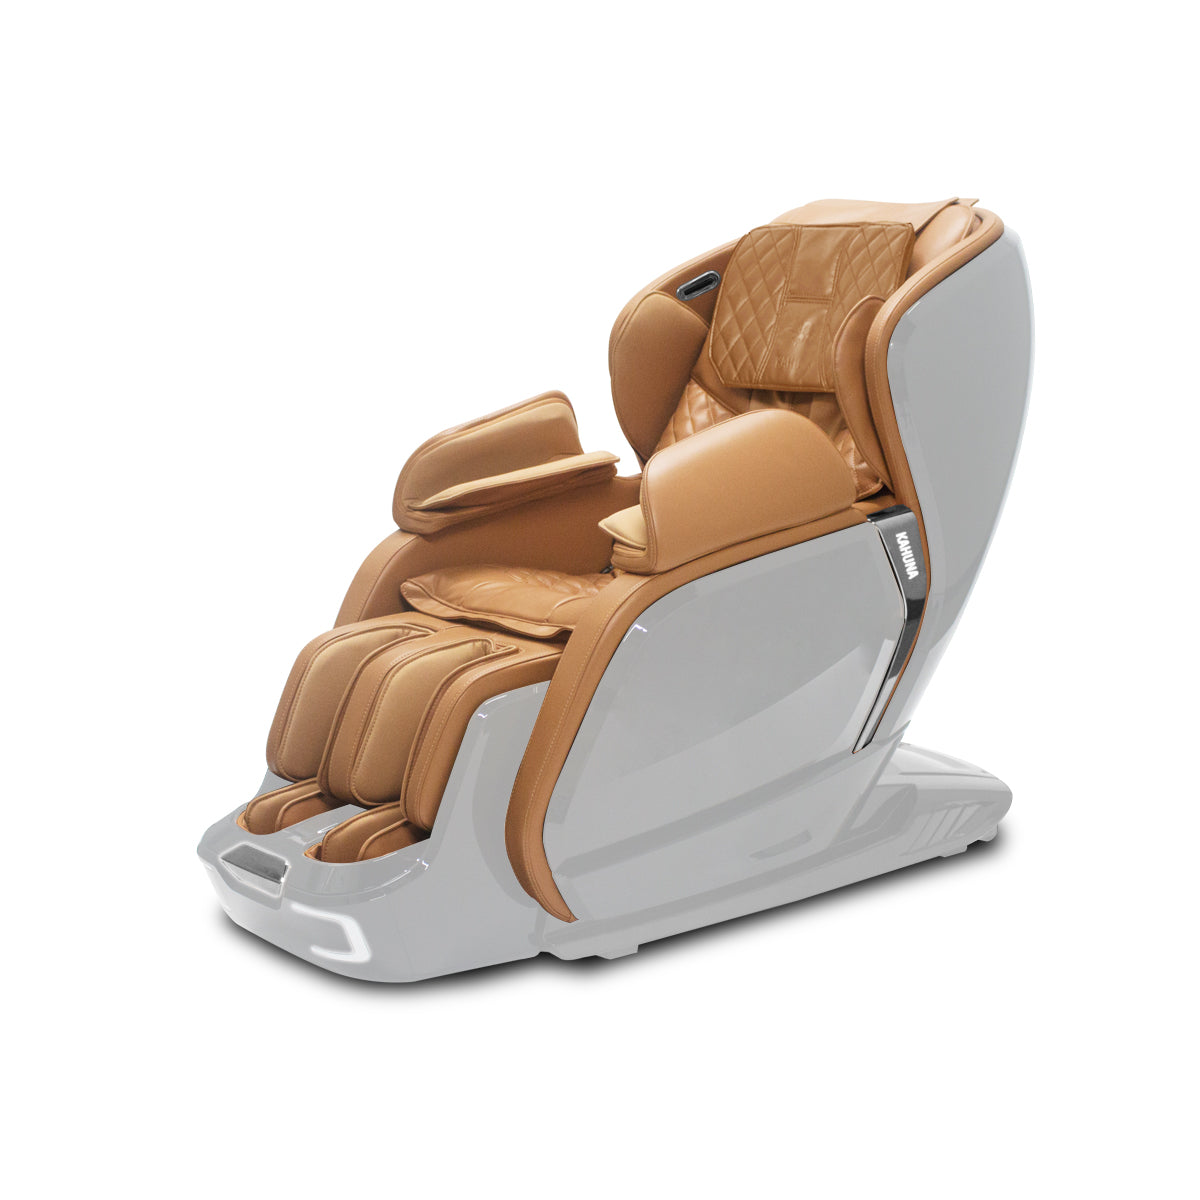 [OPEN BOX, A] SL-track Auto Extension Kahuna Massage Chair, LM-6800T White/Camel